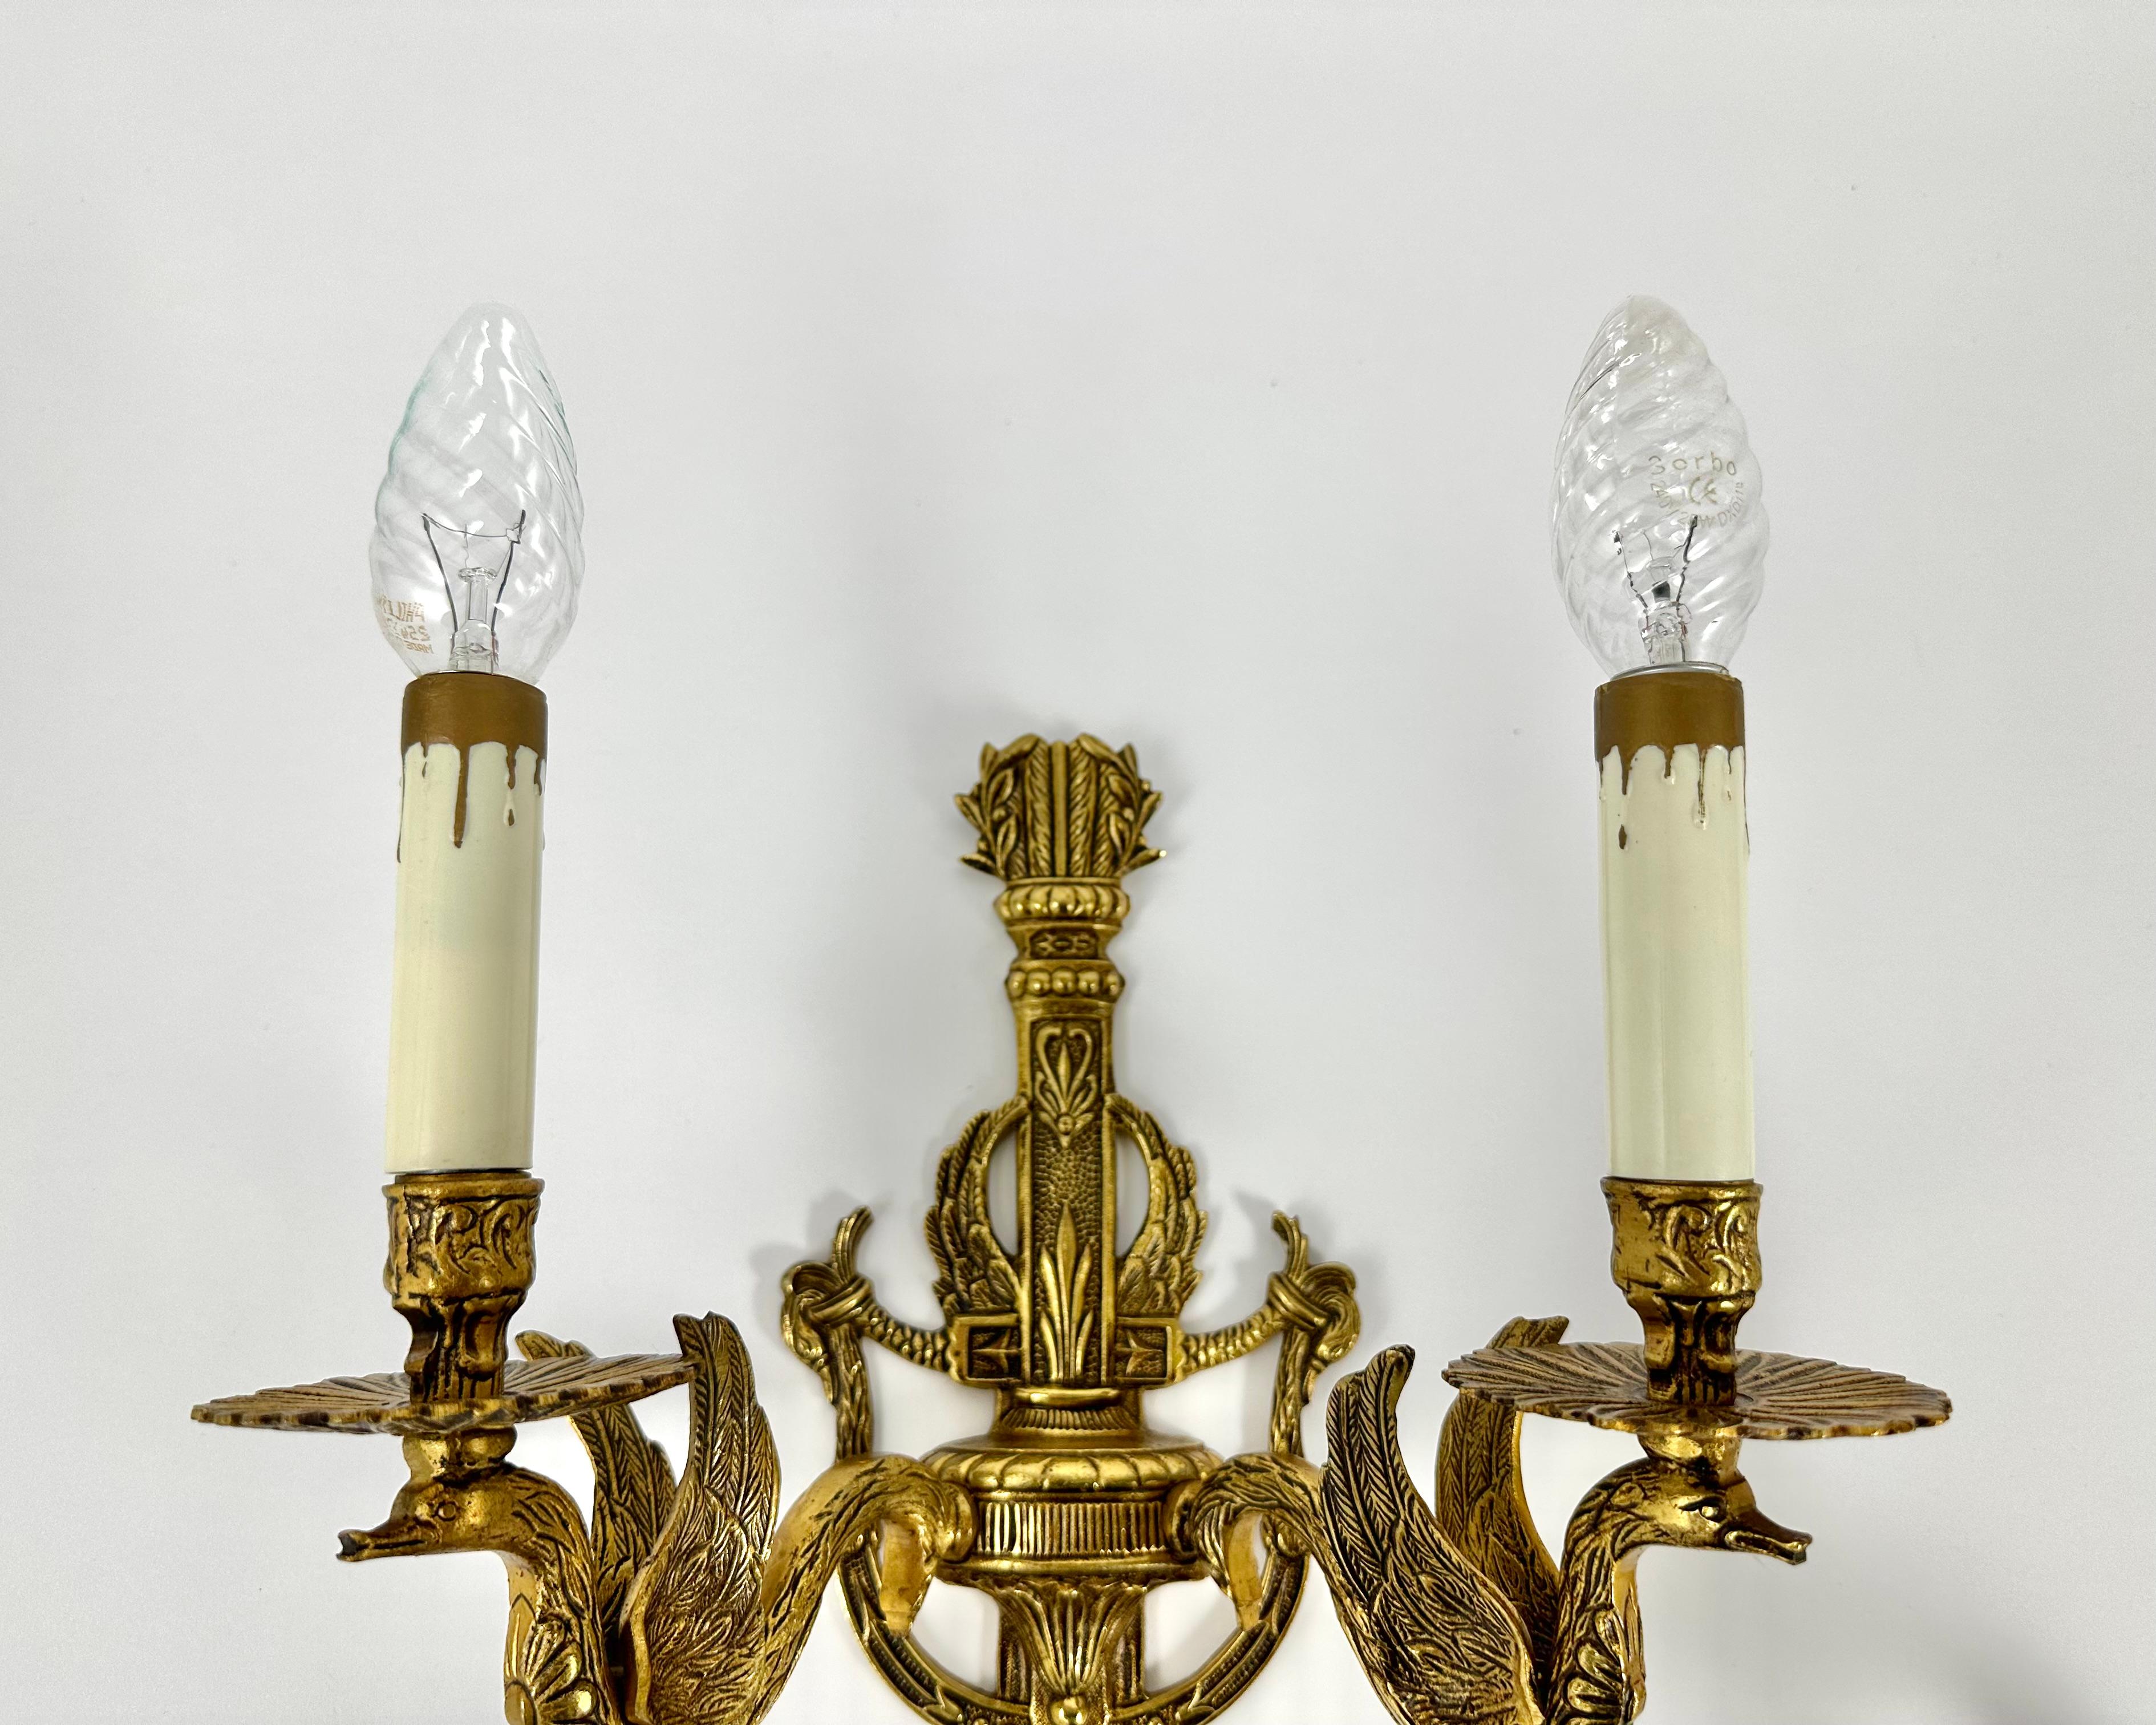 An exquisite pair of two-light Empire style gilt bronze wall sconces from the 1930s.

Drawing inspiration from the eighteenth century, these beautiful light fixtures demonstrate superb craft and detail along with their original gilded